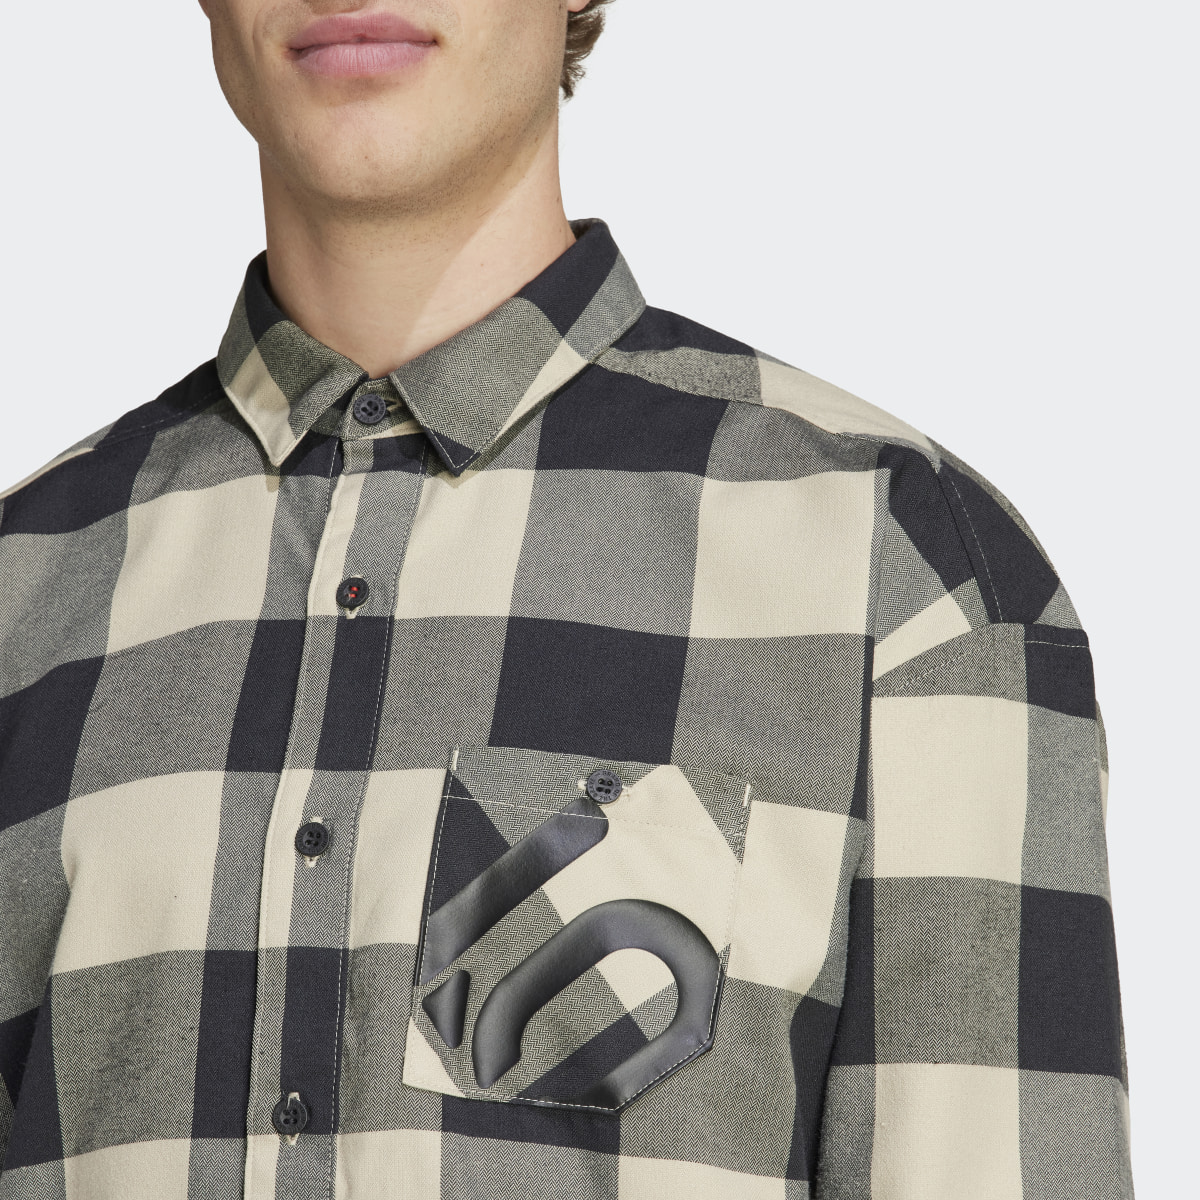 Adidas Five Ten Brand of the Brave Flannel Shirt (uniseks). 5